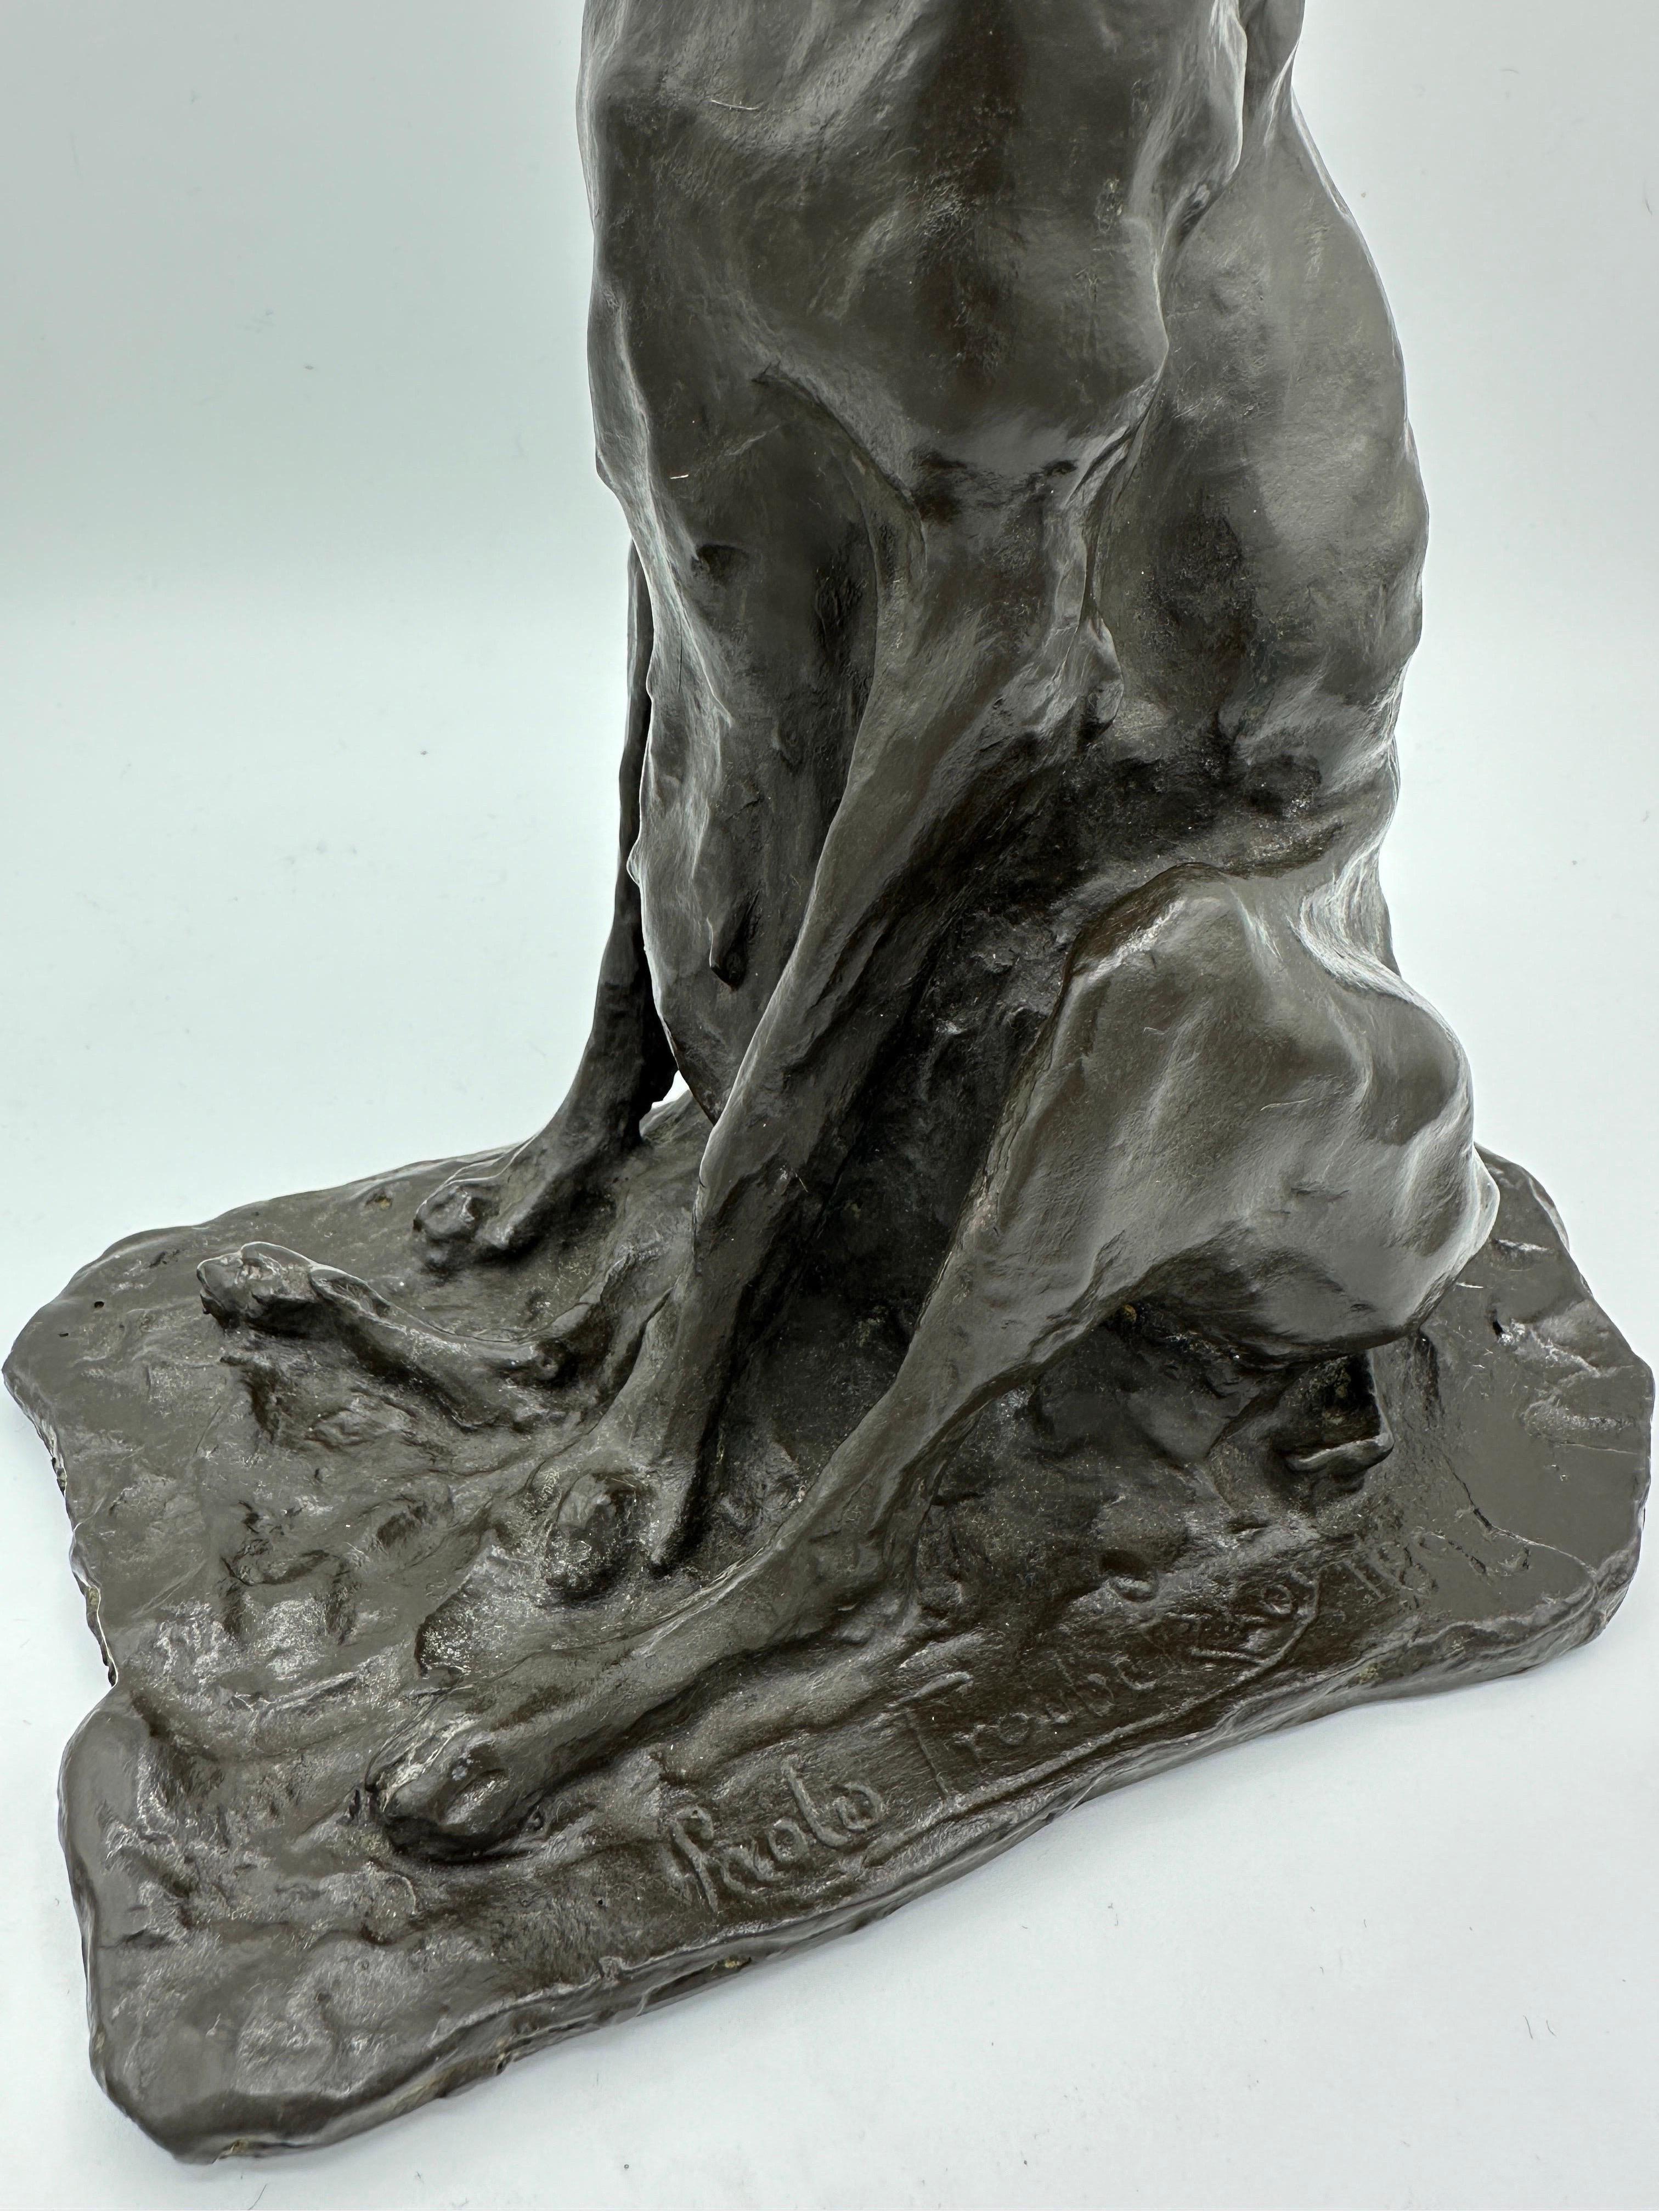 A late 19th century bronze of a hound, seated on a naturalistic base, after Prince Paul Troubetzkoy. Incised to base 'Paolo Troubetzkoy 1893', with a dark brown patina.

Born in 1866 in Intra, on the shores of Lake Maggiore in Northern Italy,